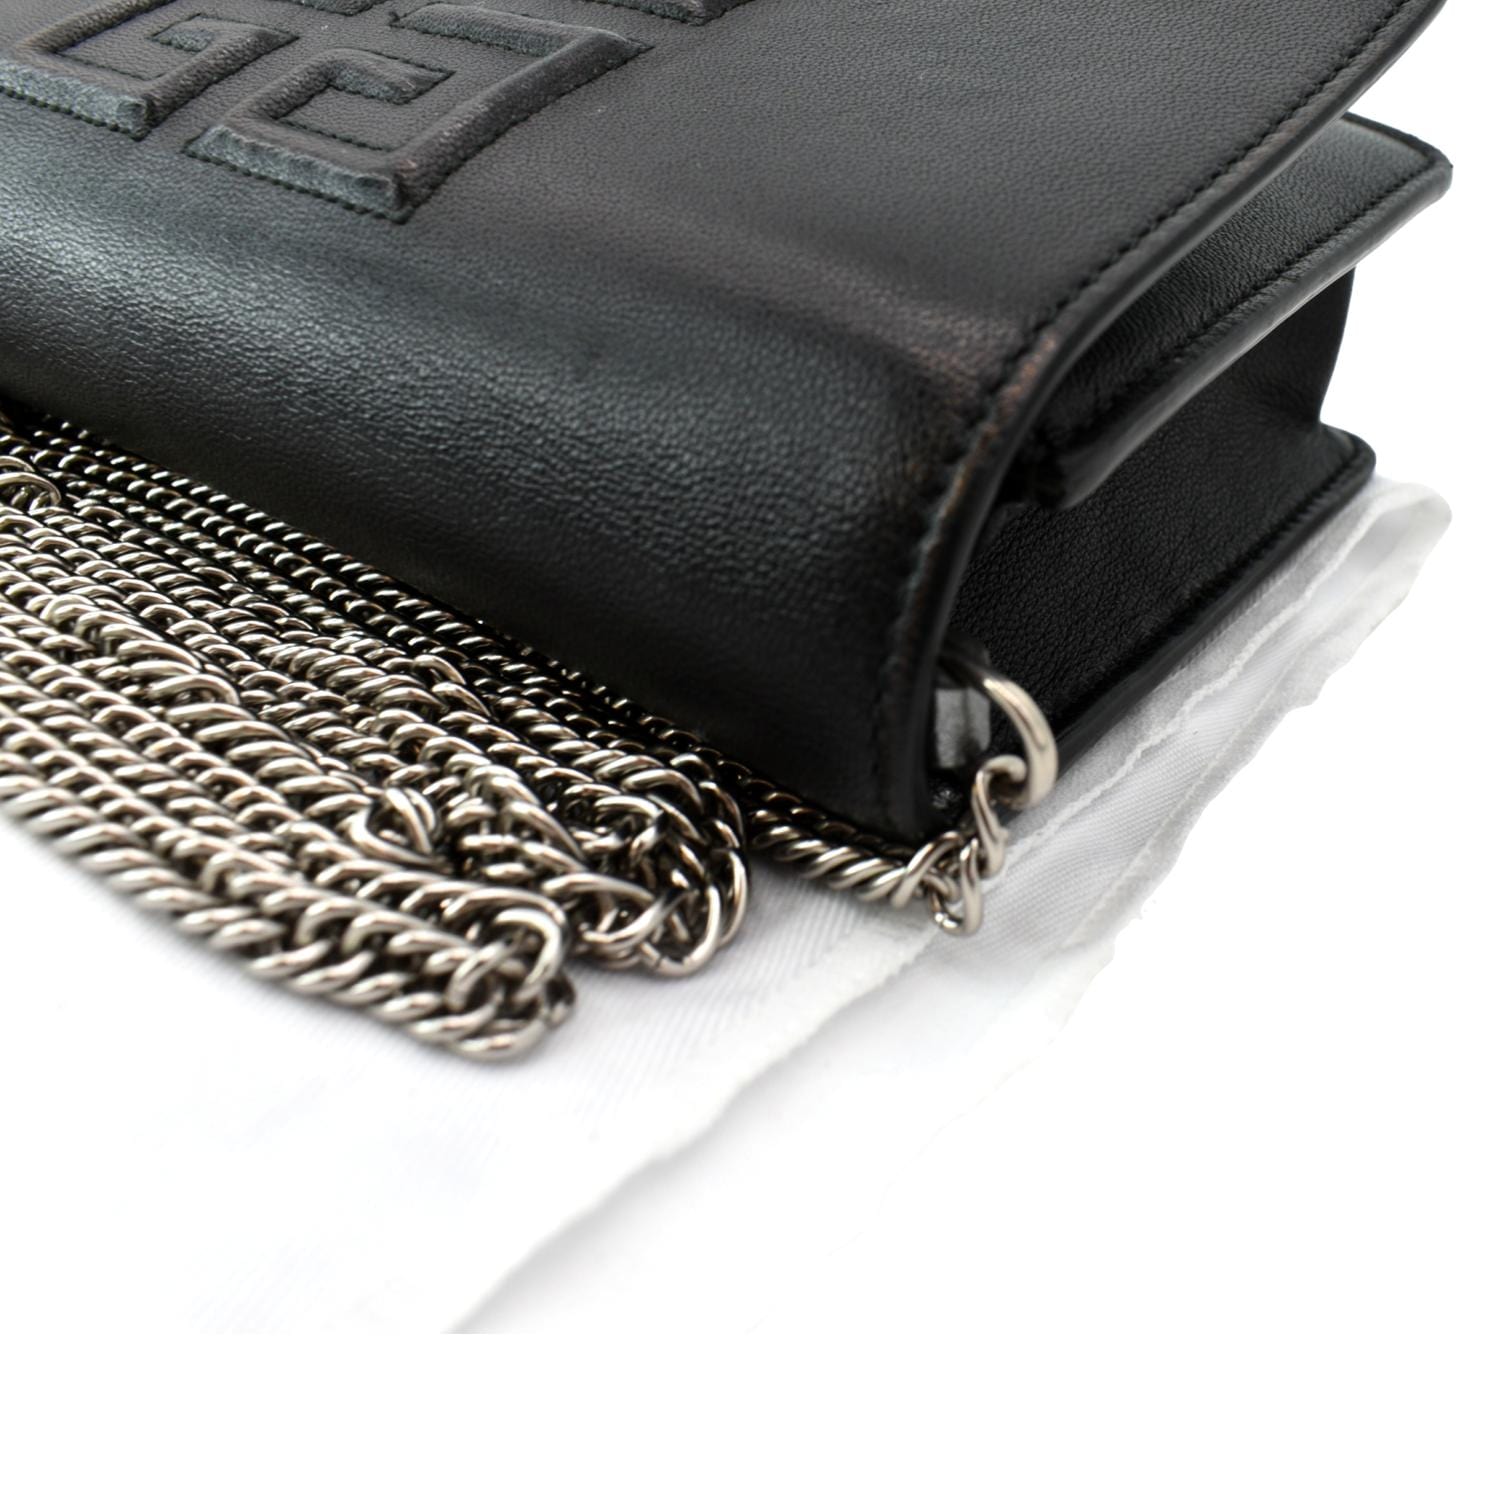 Replying to @meetthepersauds chain wallets are a great buy! If damier